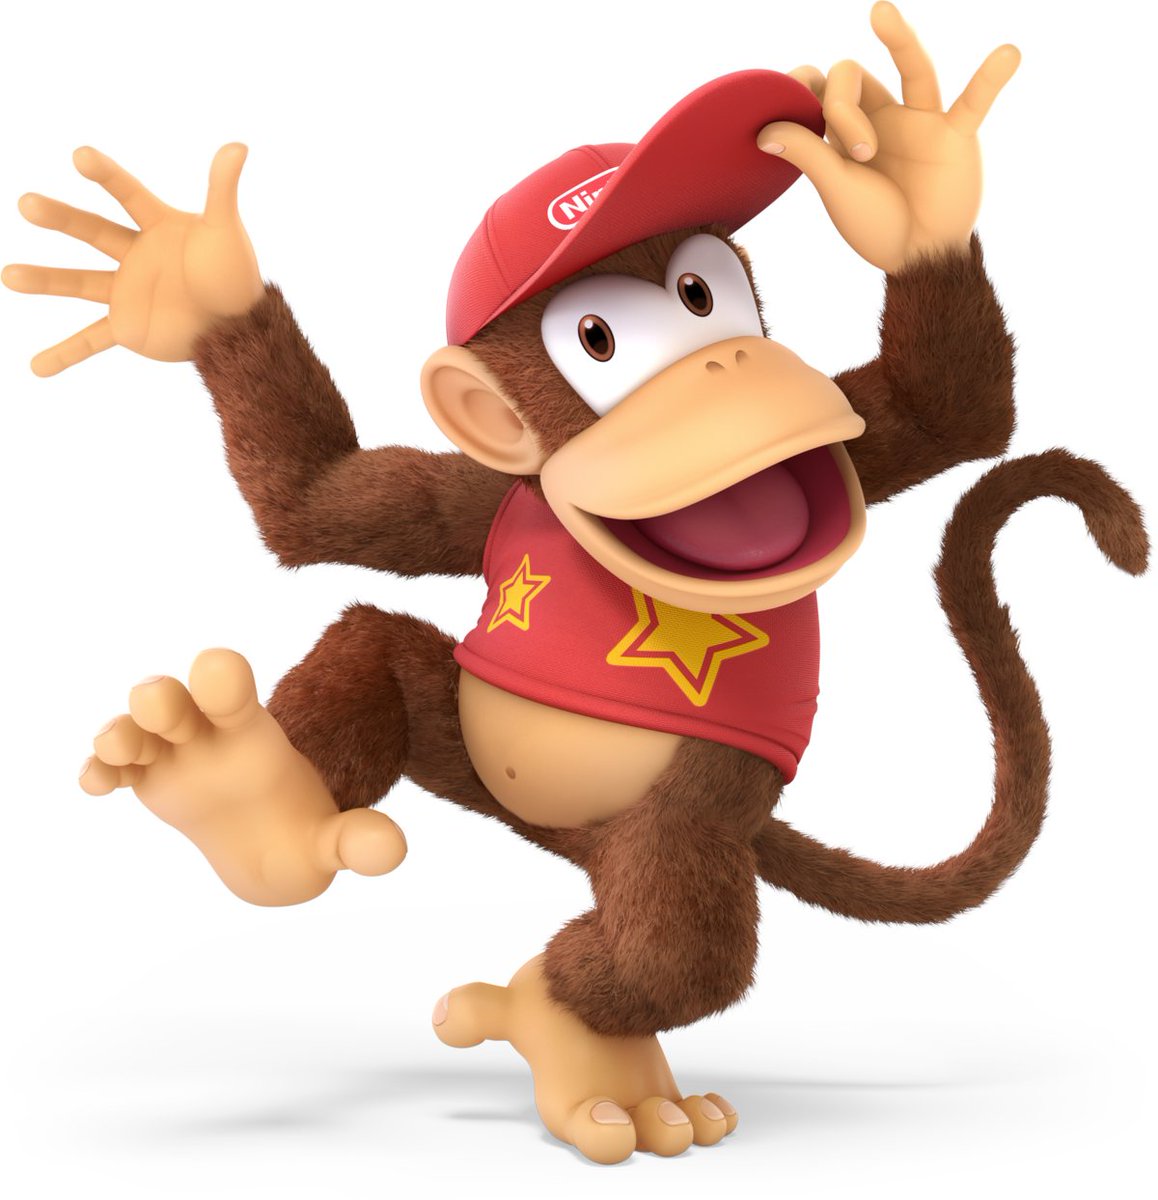 6) DIDDY KONGLow ranking for Diddy I know. i'm being Controversial. He's good. He's reliable. He is the "Robin" to Donkey Kong's "batman" though and that hinders him. i like that he can play guitar and fly a jetpack. great "Nintendo" hat. he's really good there's just better.